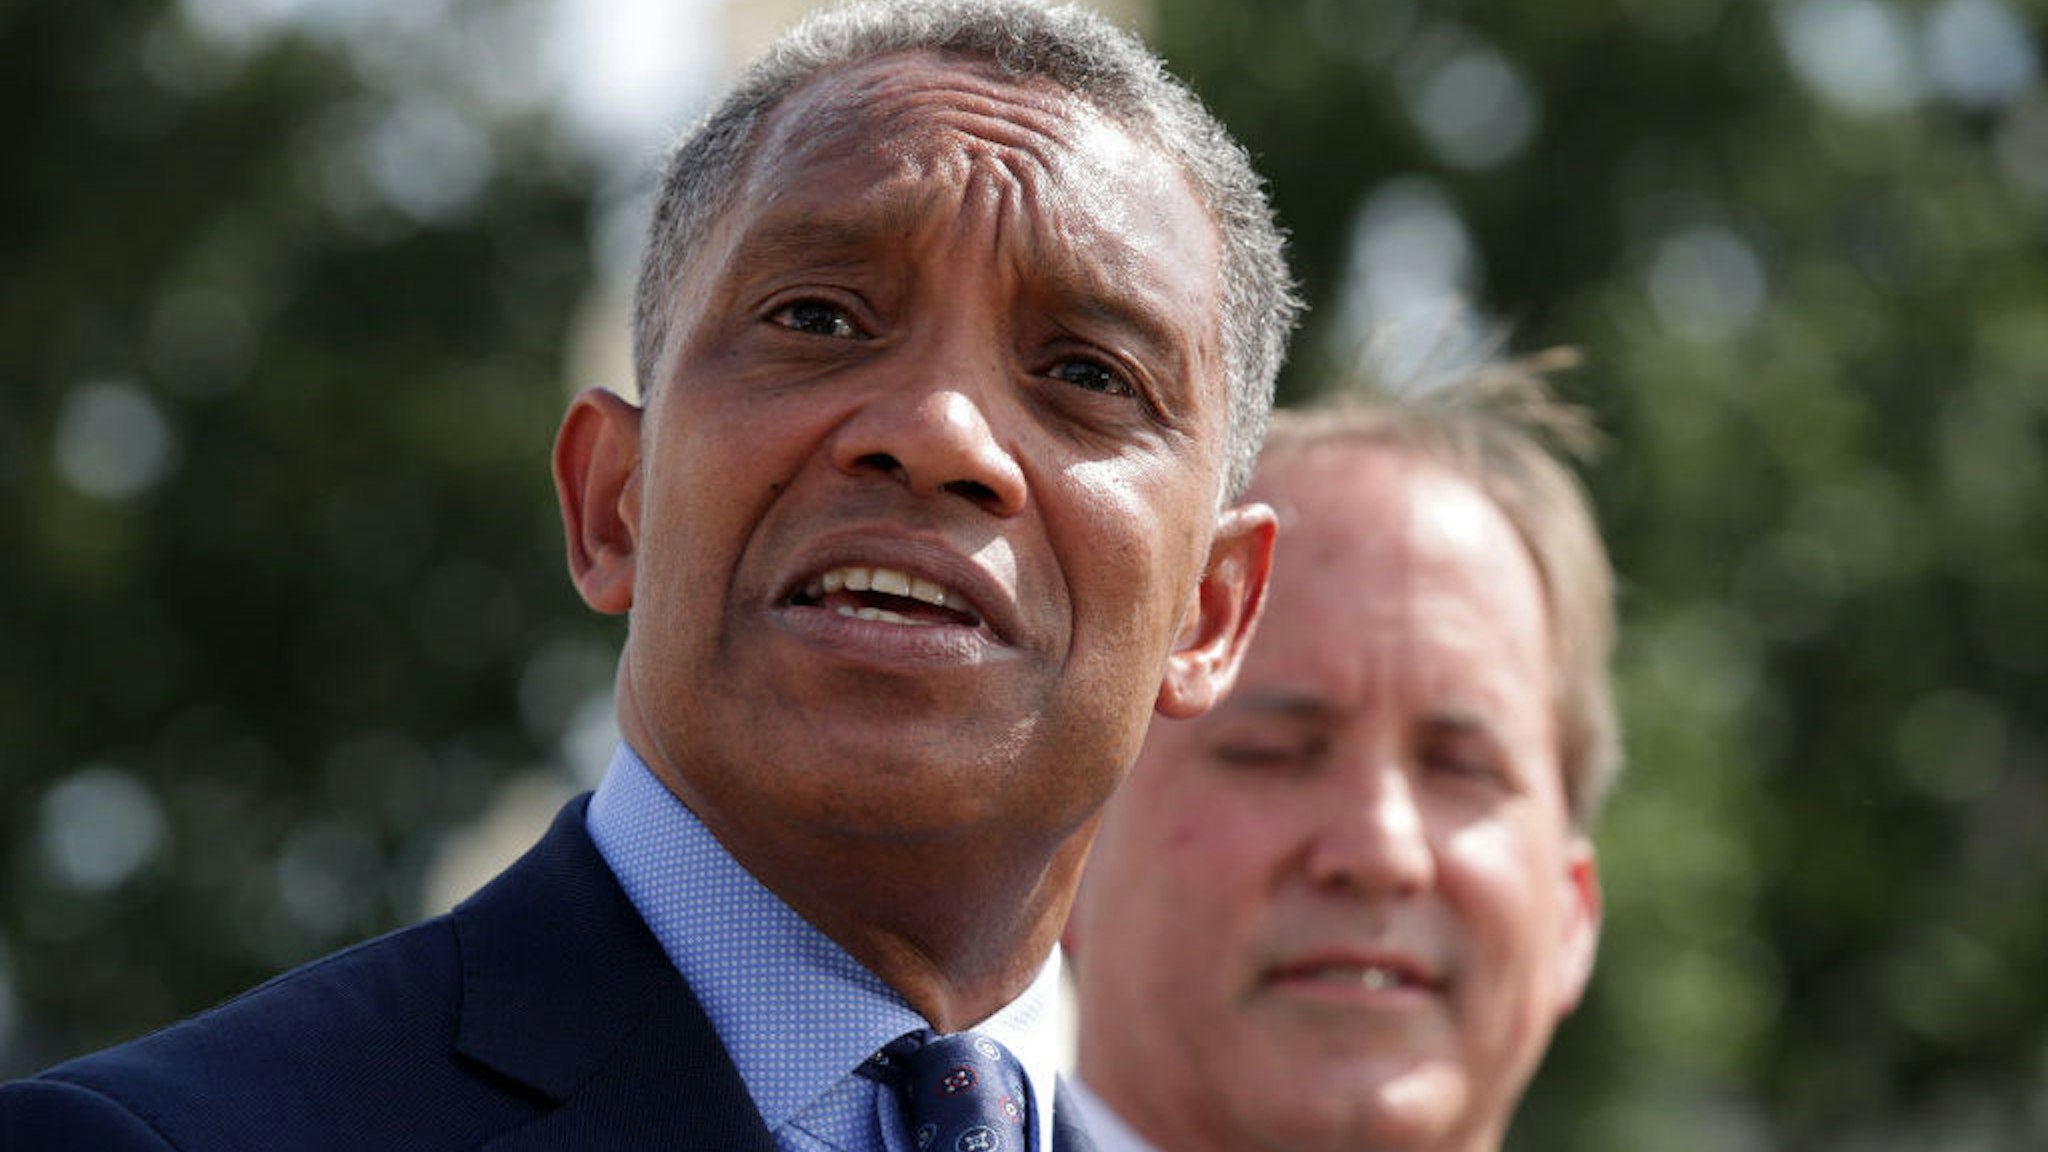 WASHINGTON, DC - SEPTEMBER 09: Attorney General of Washington, DC, Karl Racine speaks as Texas Attorney General Ken Paxton listens during a news conference in front of the U.S. Supreme Court September 9, 2019 in Washington, DC. Fifty state attorneys general are joining together to investigate Google’s possible antitrust violations. (Photo by Alex Wong/Getty Images)